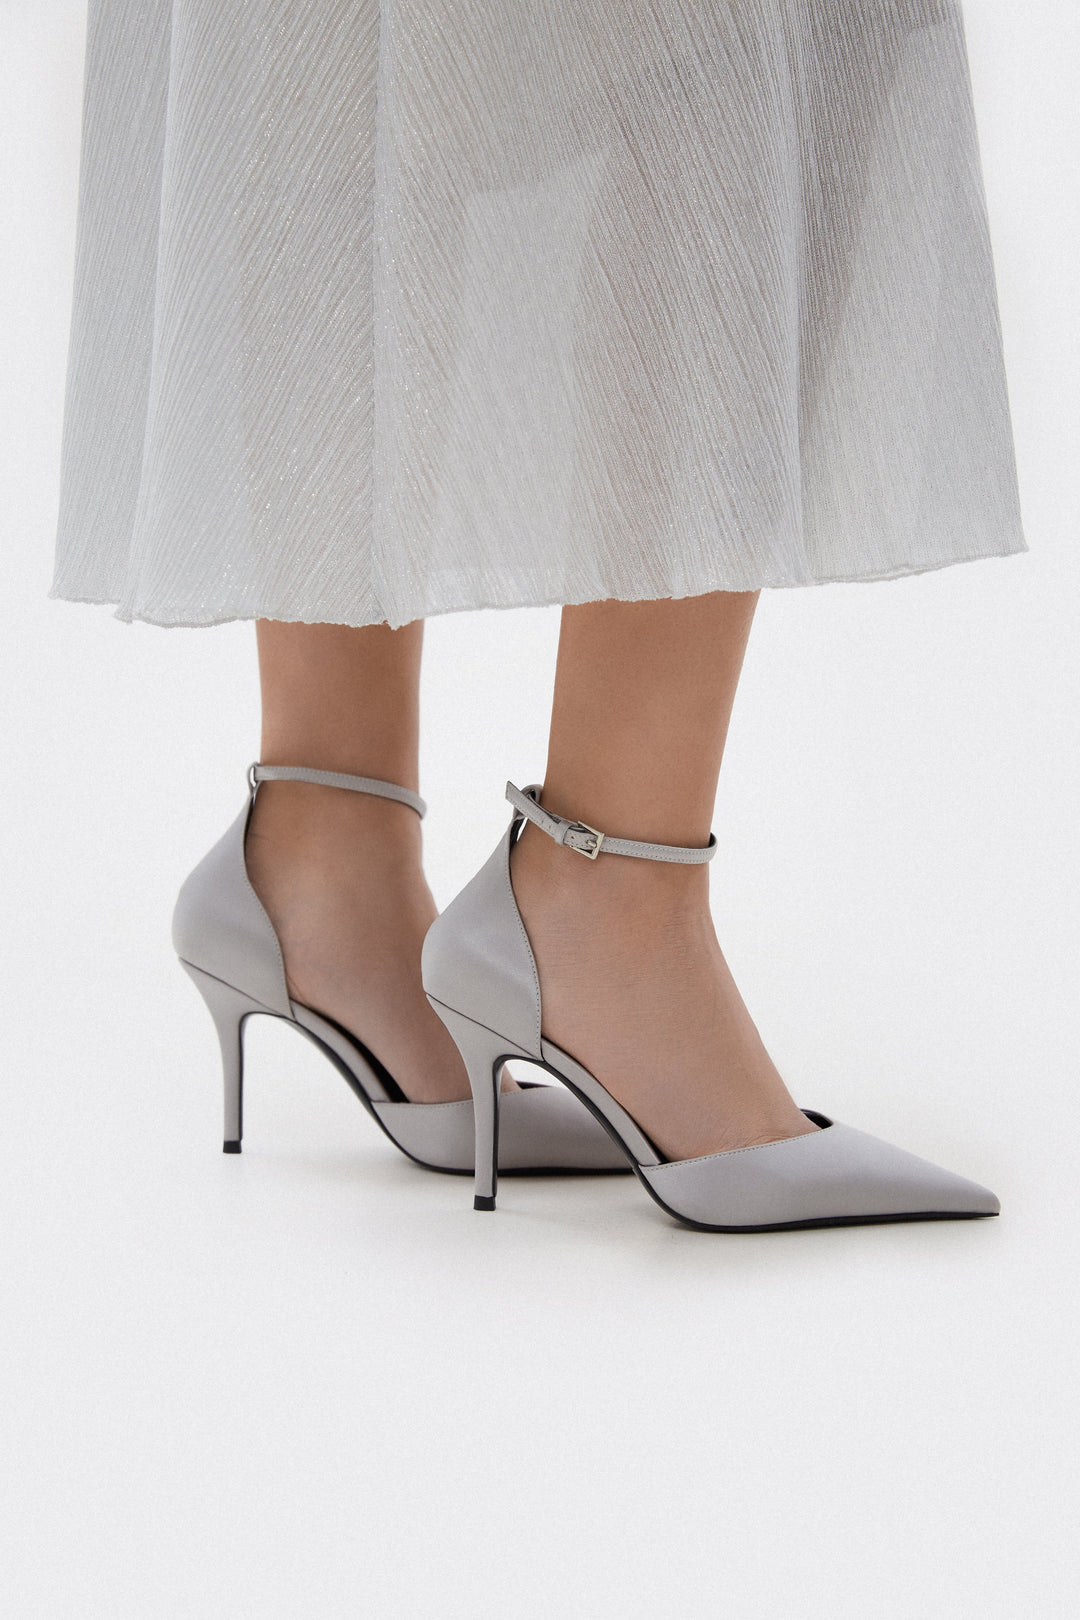 Women's grey pointed toe pumps with crystals Estro x MustHave - presentation on a model.